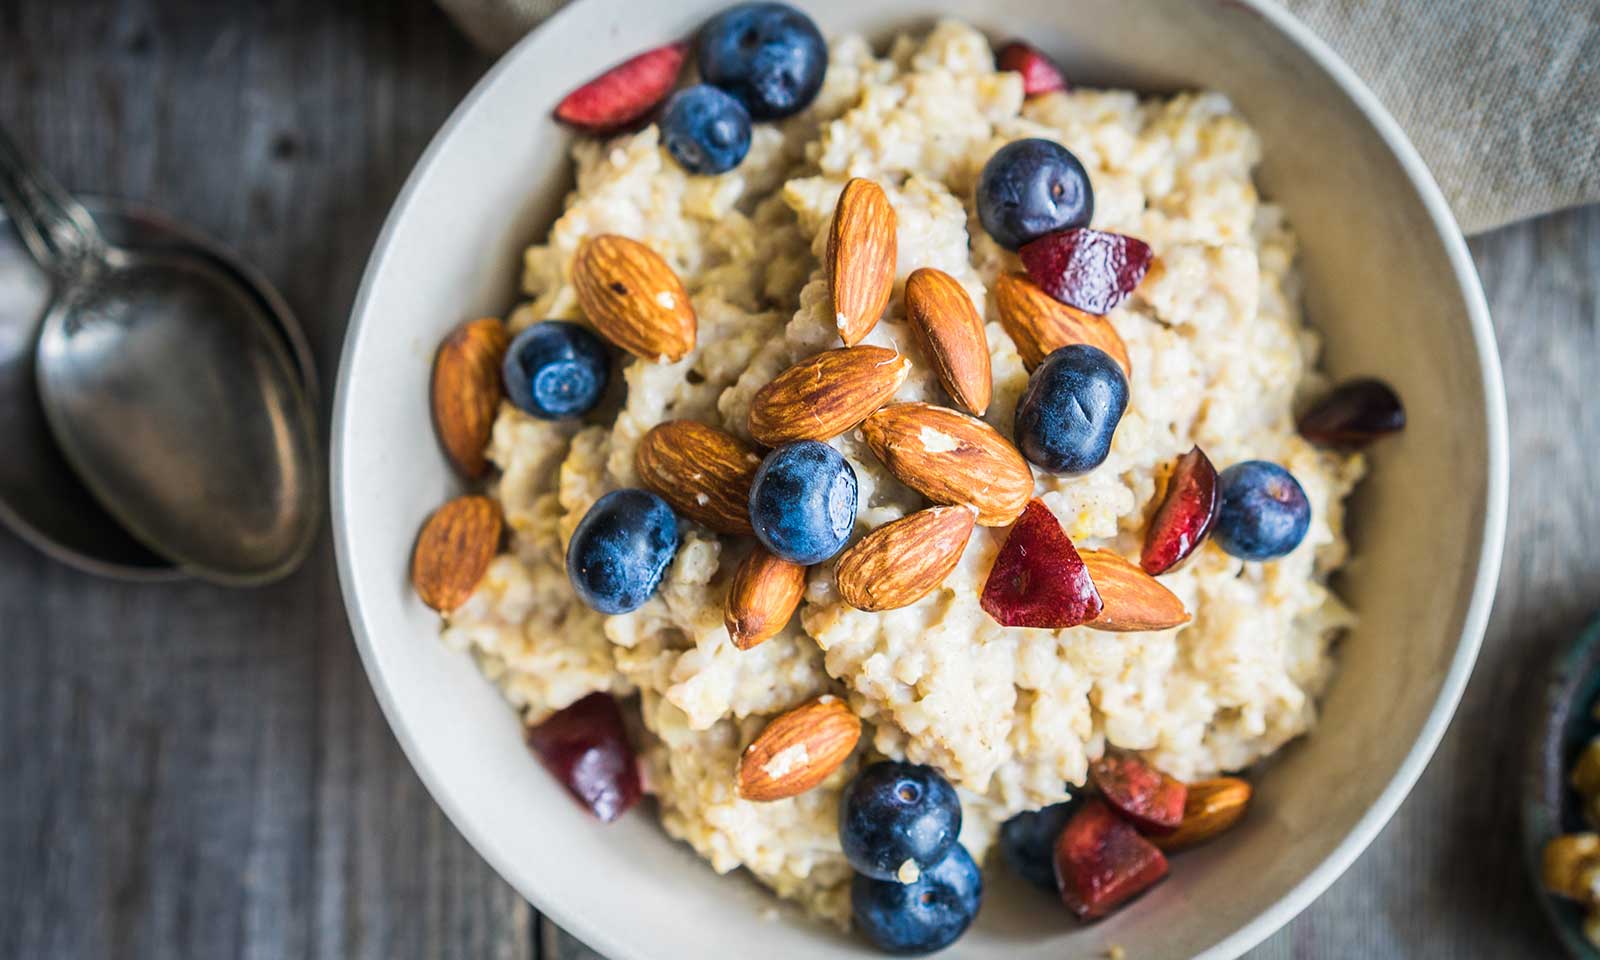 6 Of The Best Breakfast Foods Ideal For Starting Your Day Right